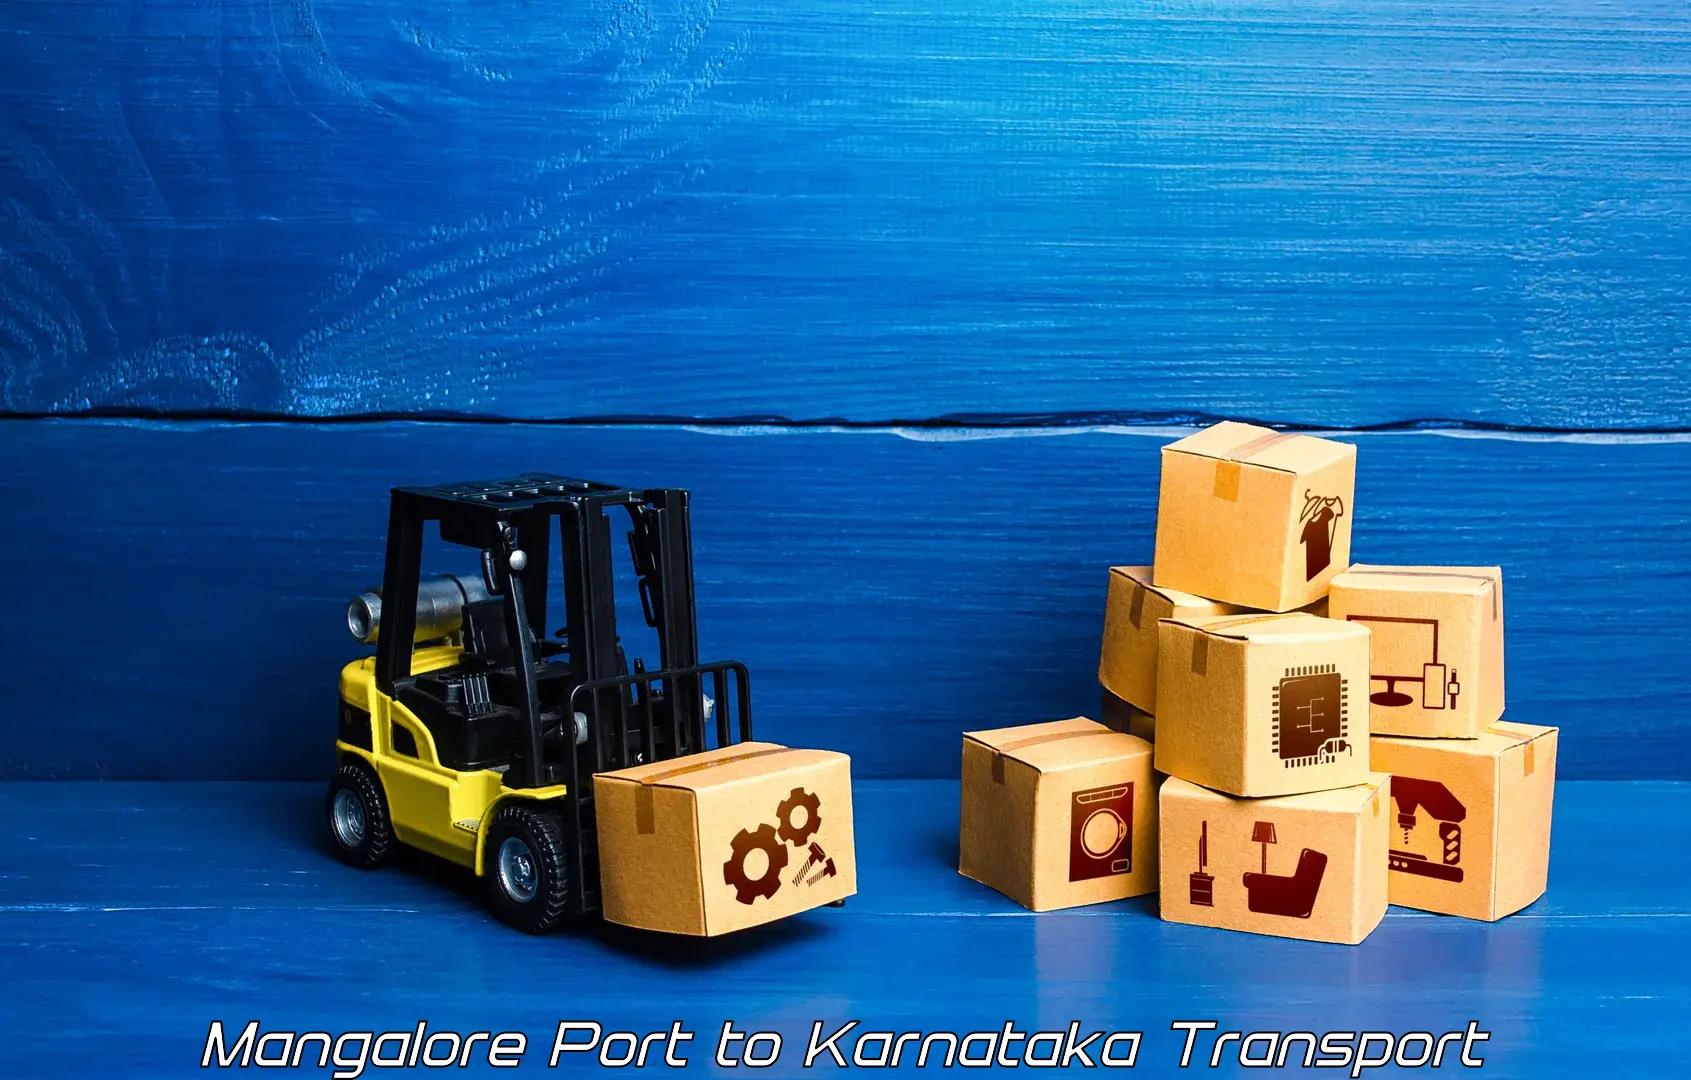 Inland transportation services Mangalore Port to Byndoor